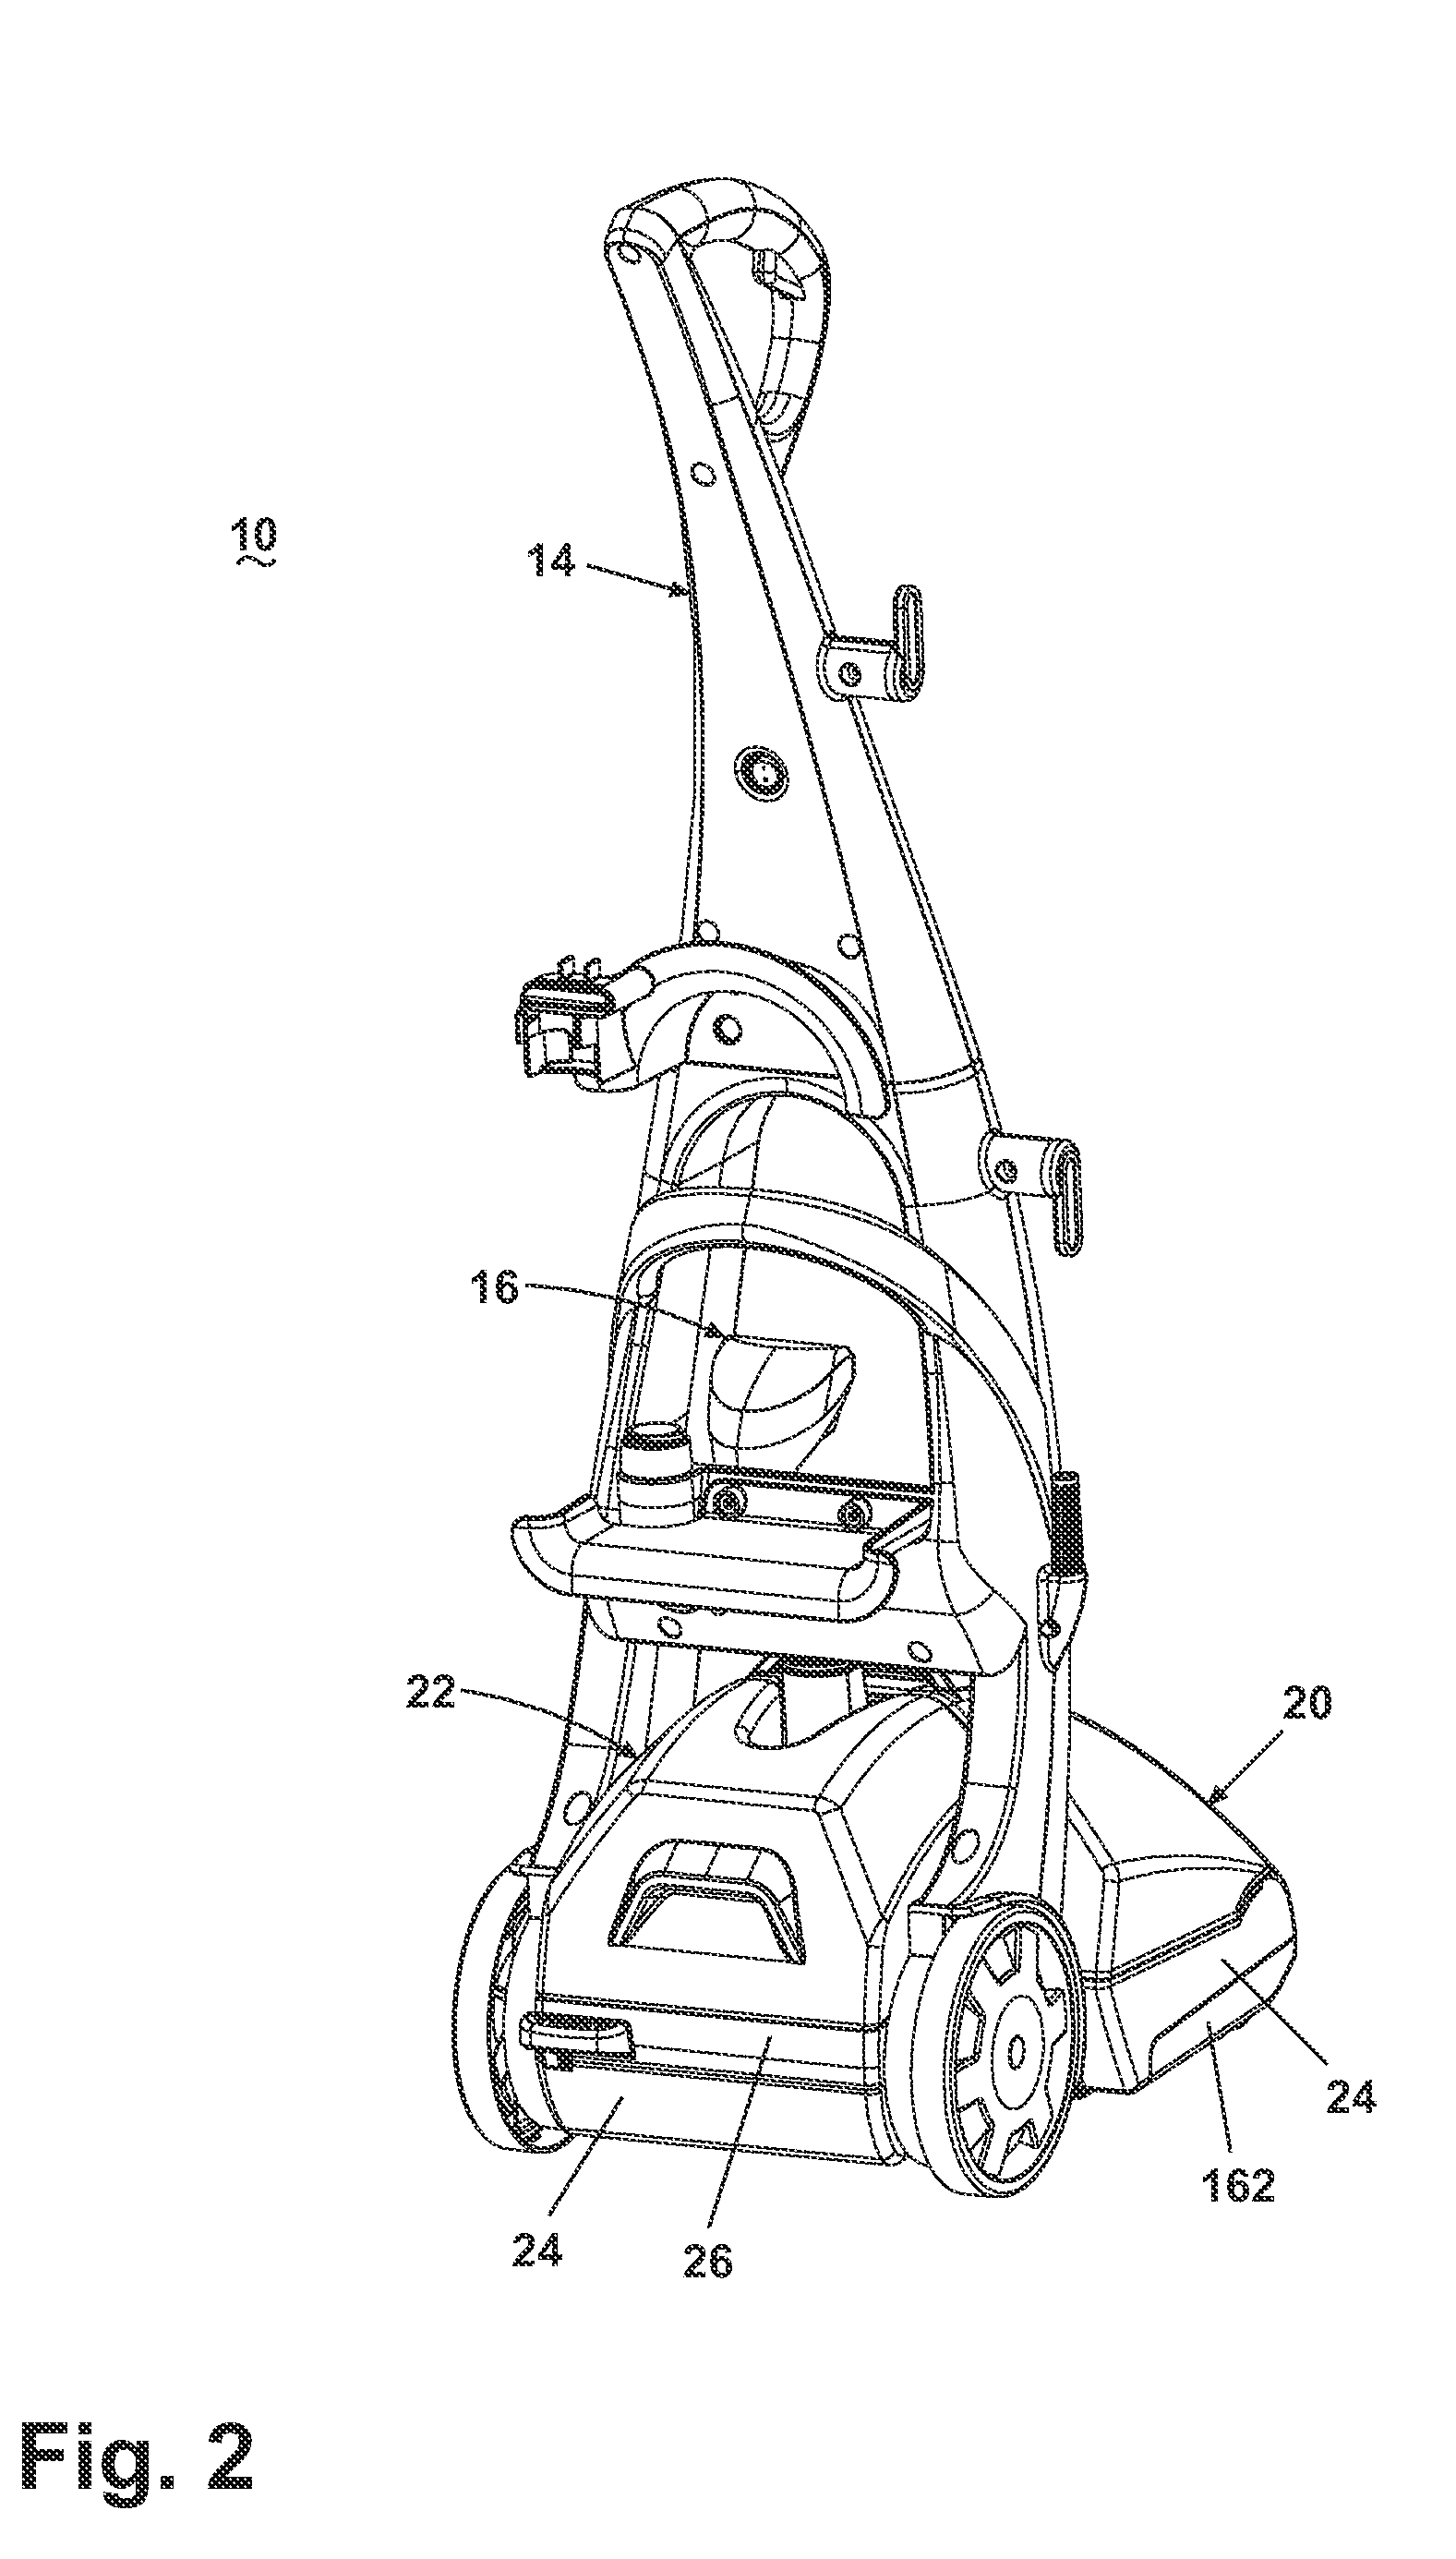 Upright extractor